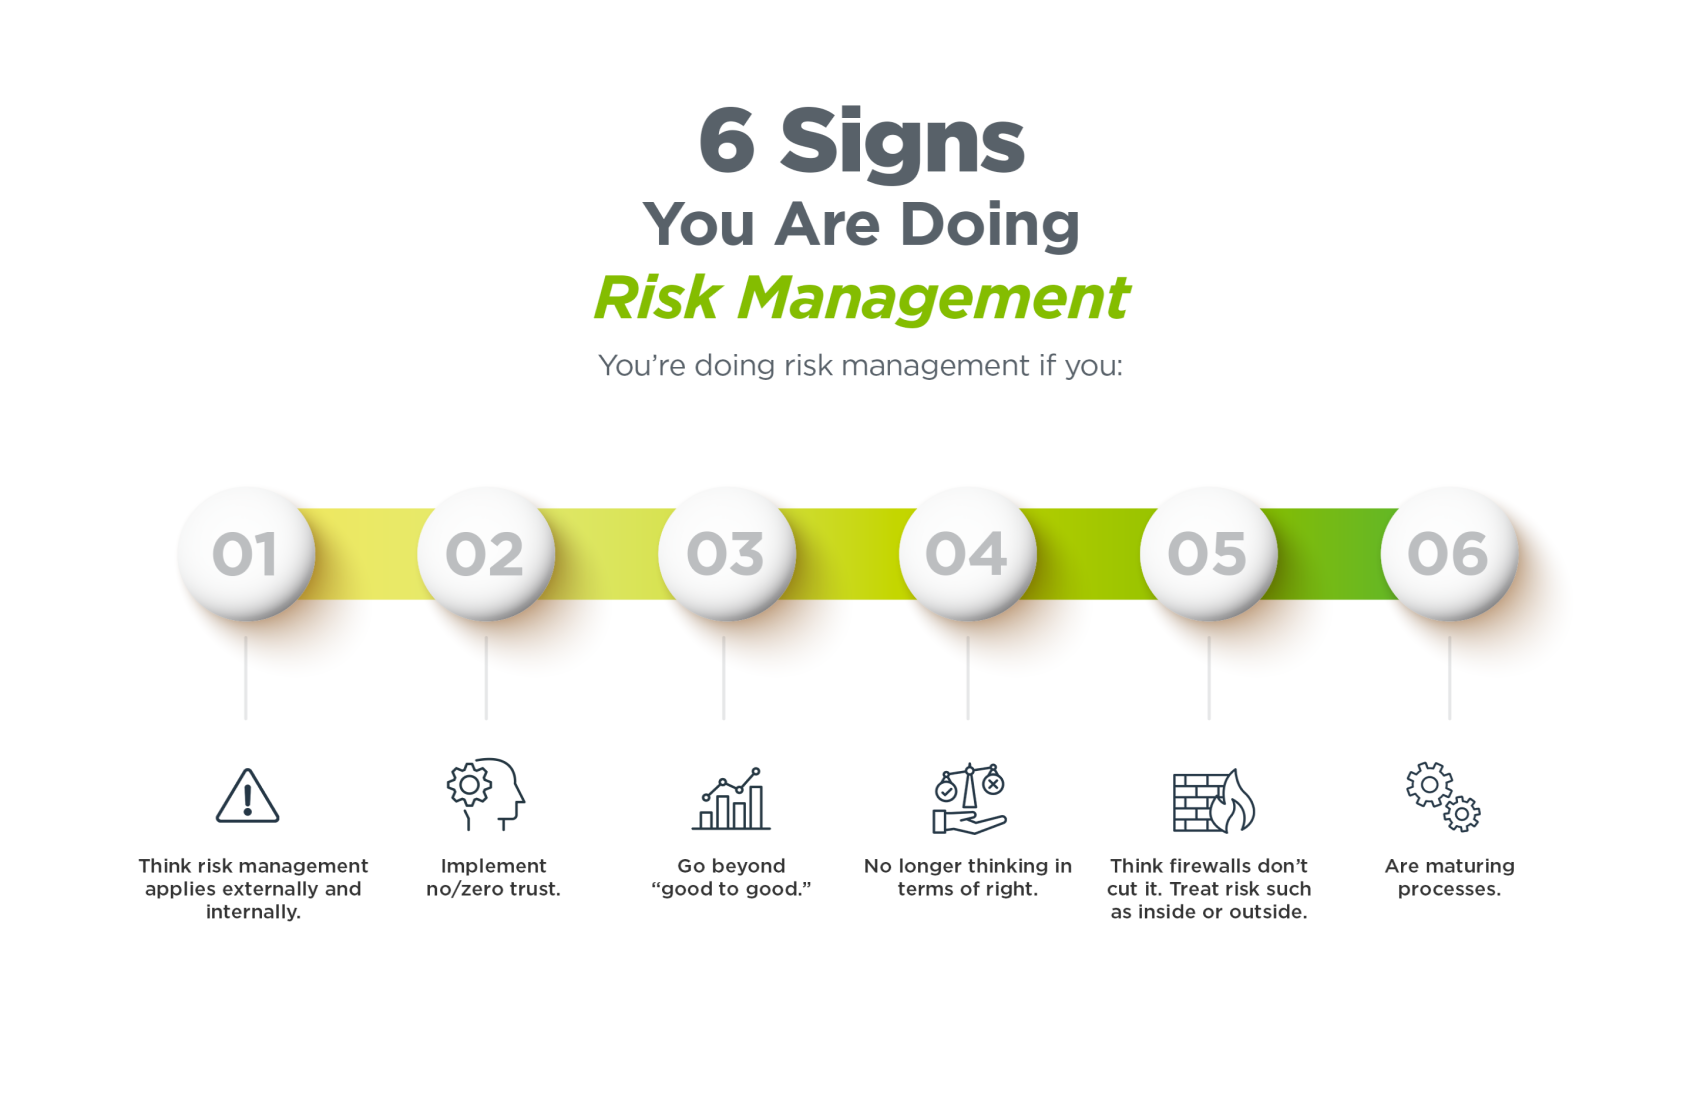 Risk management infographic showing the 6 signs you are doing risk management